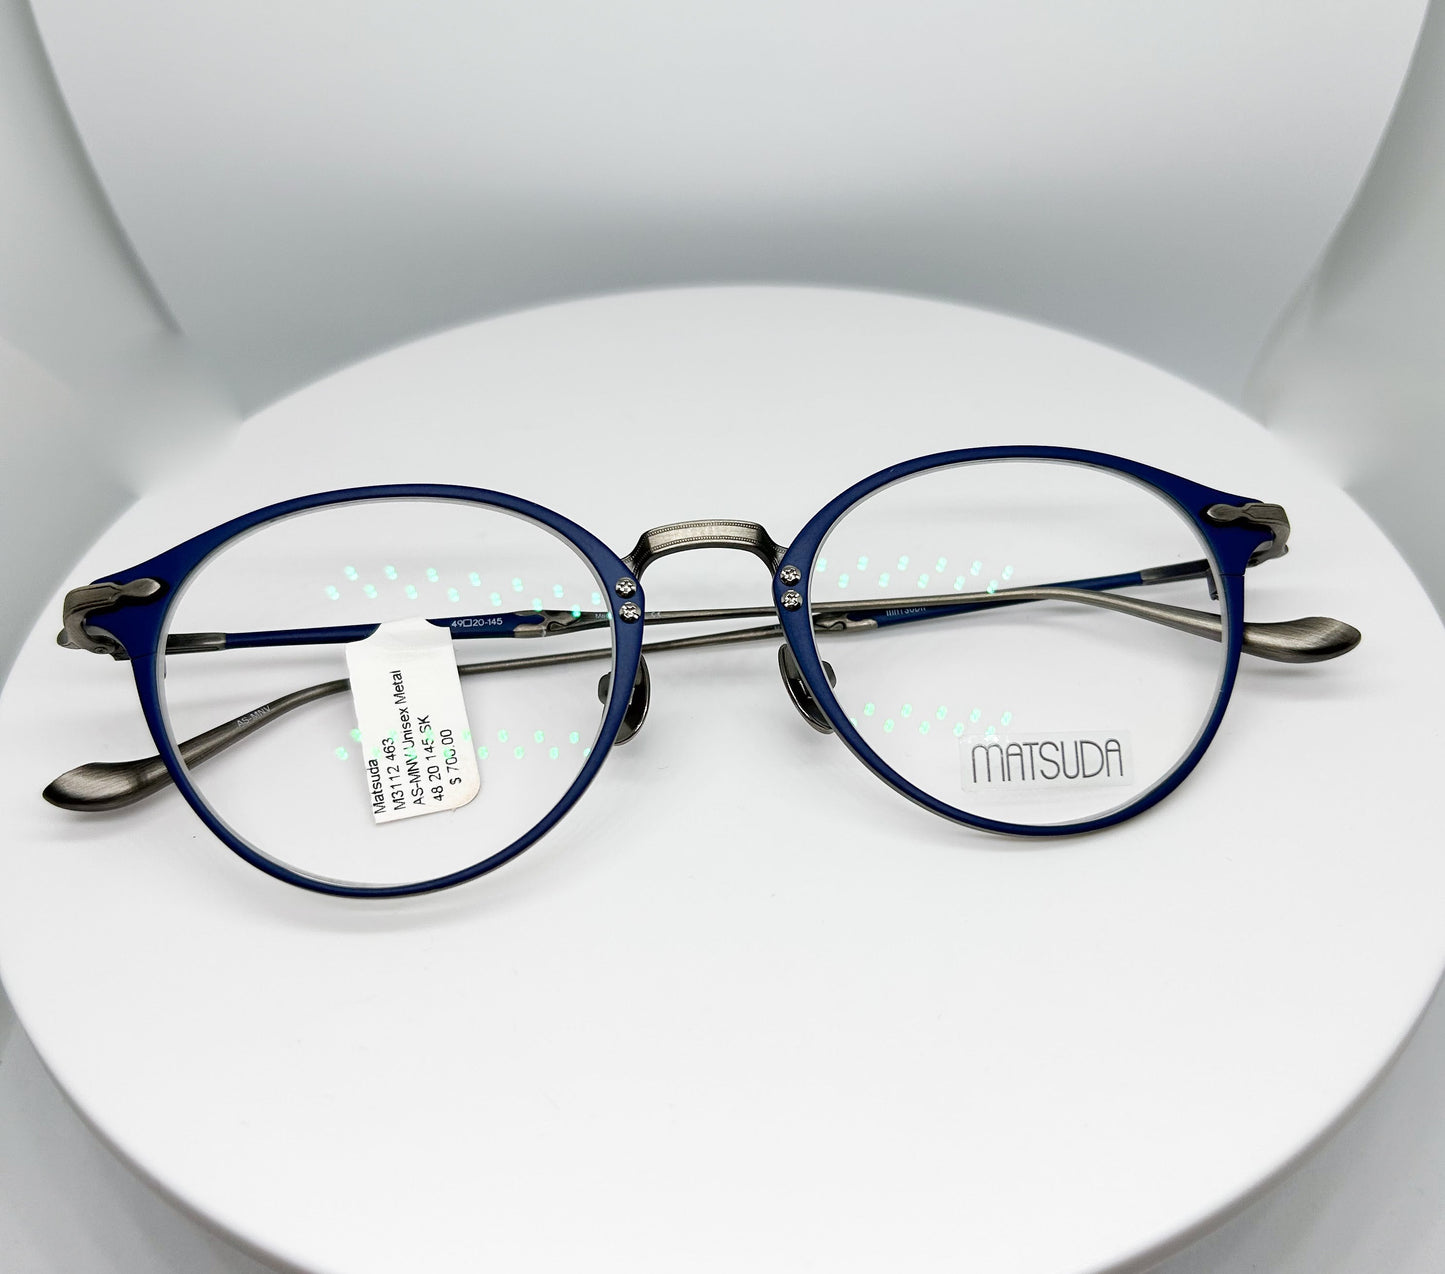 <p>Matsuda M3112 is a  Antique Silver, Blue, Titanium Optical Frame with a Panto shape.</p><p>Shop with confidence from Adair Eyewear, a MATSUDA Authorized Dealer.  We have provided the best in customer service and great designer eyweear for over 40 years.</p>